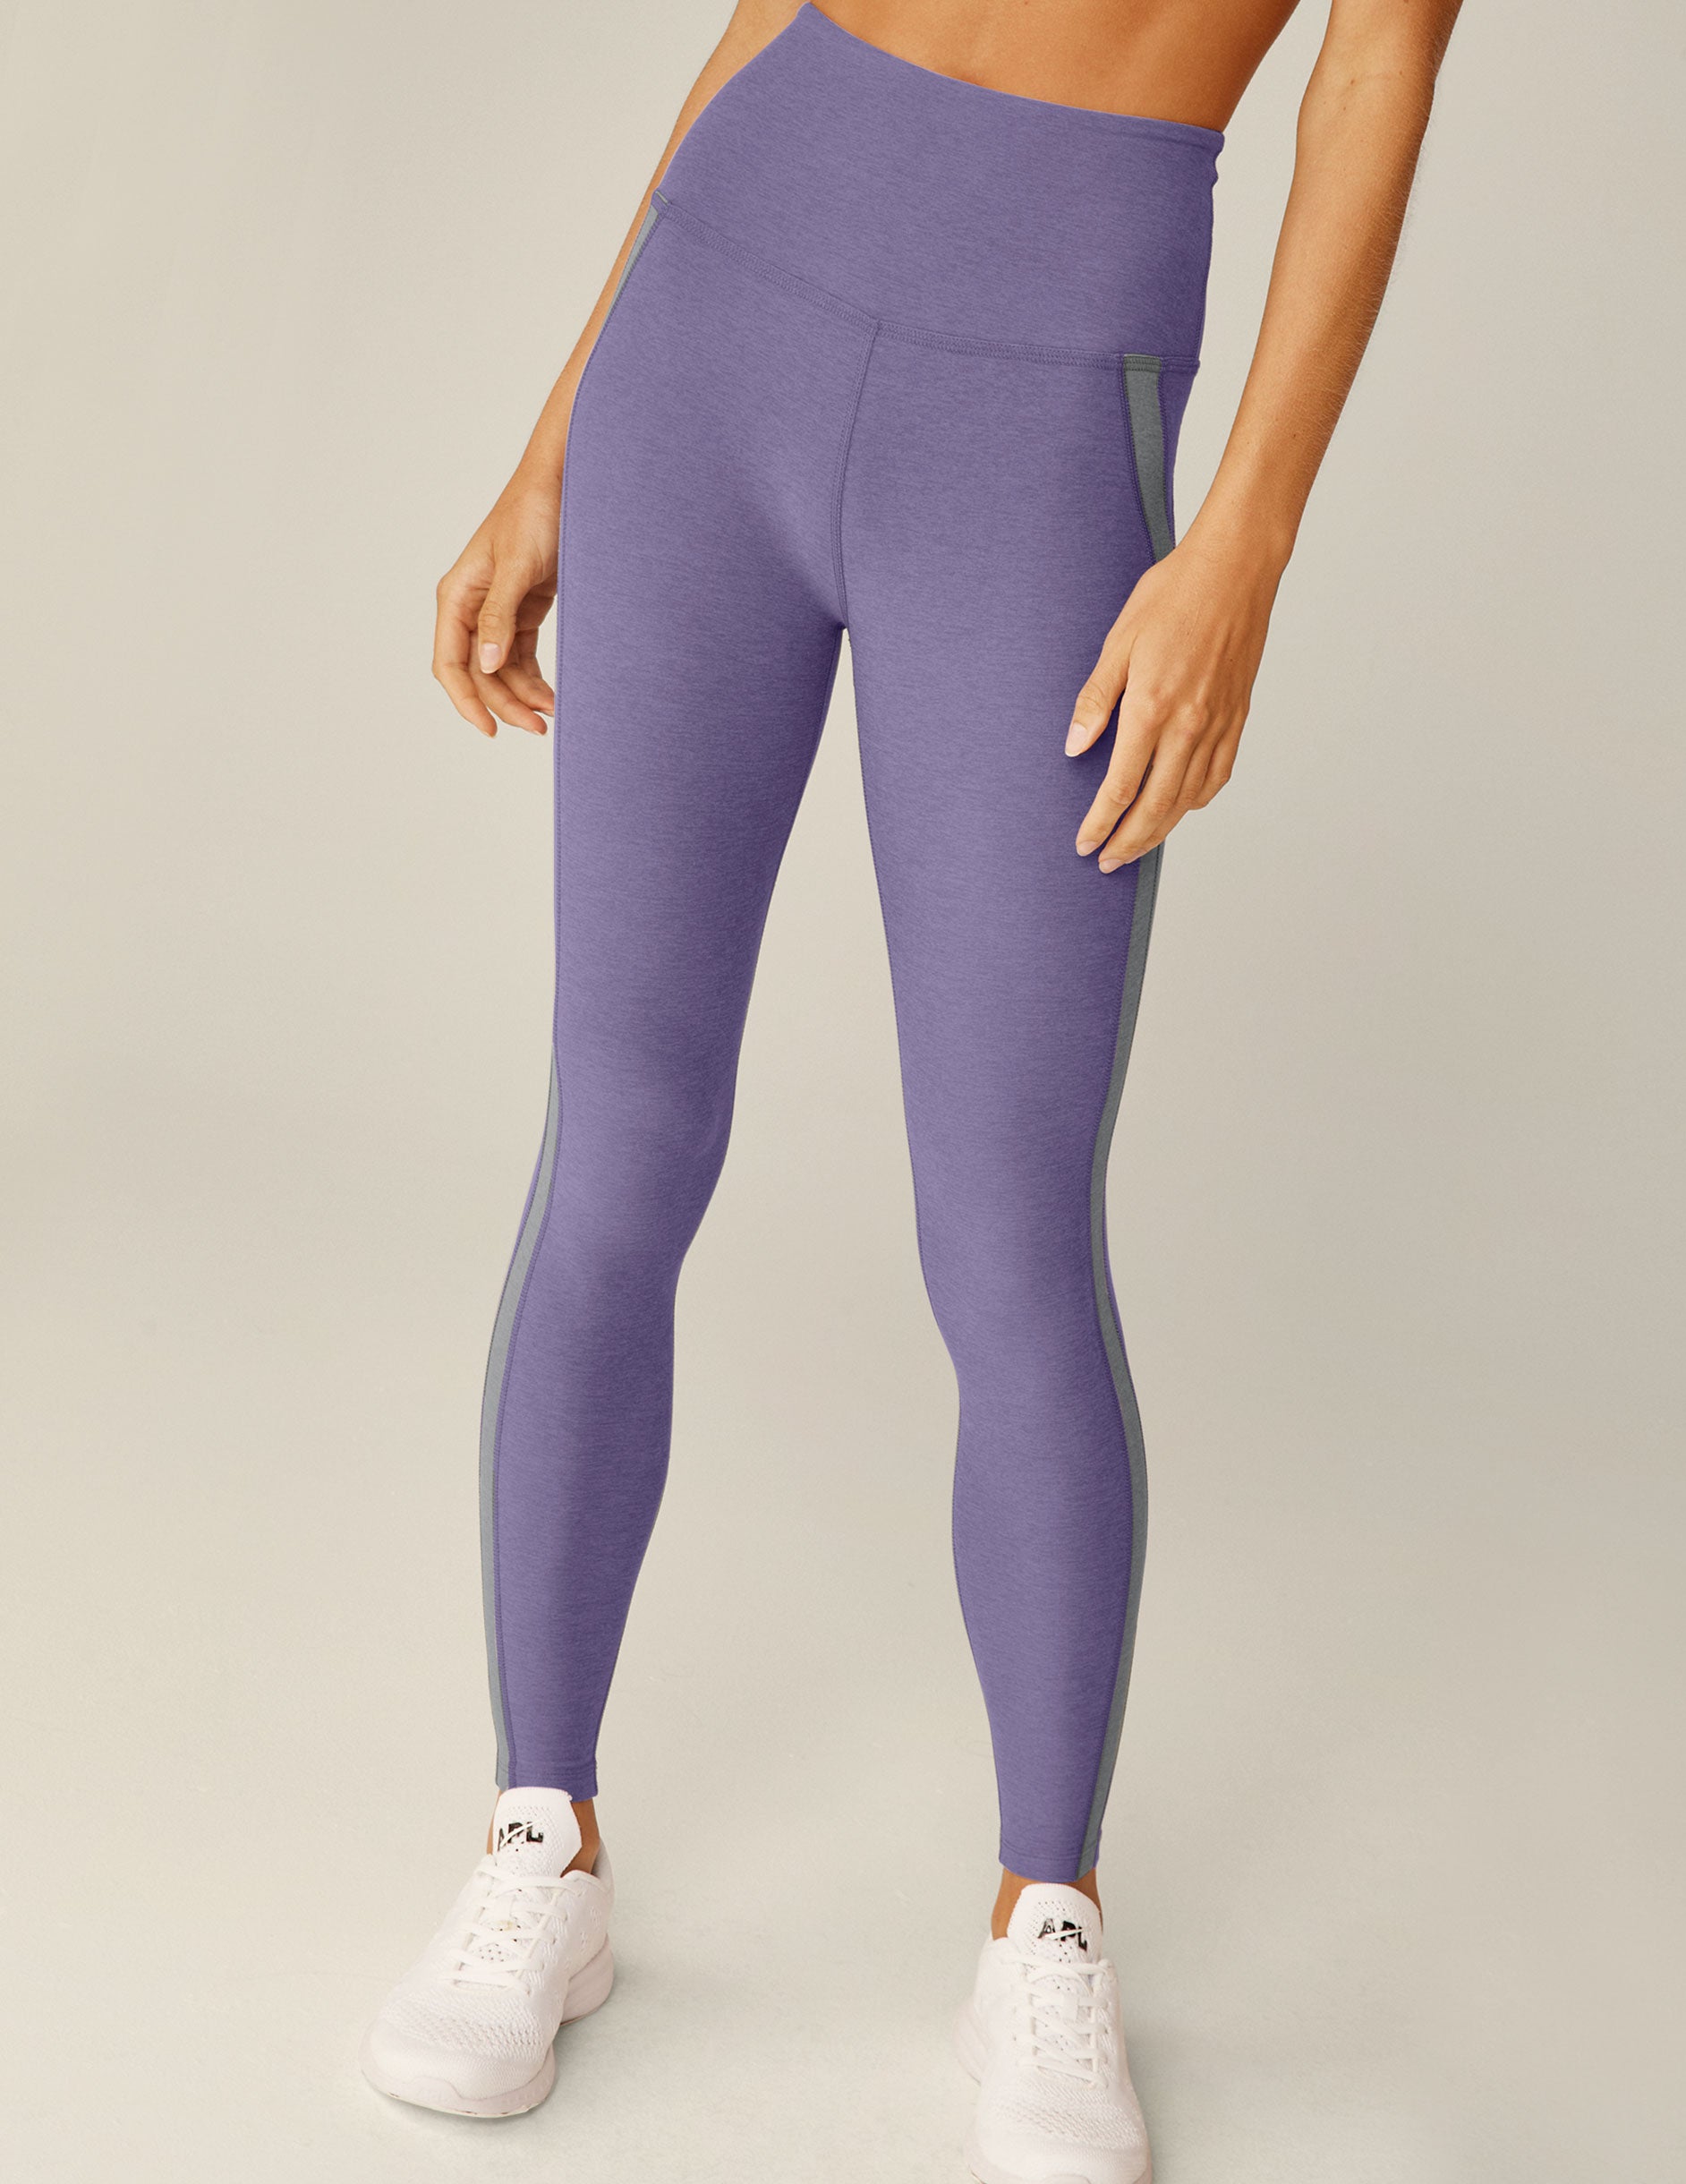 purple high-waisted midi leggings with gray trim down the side. 